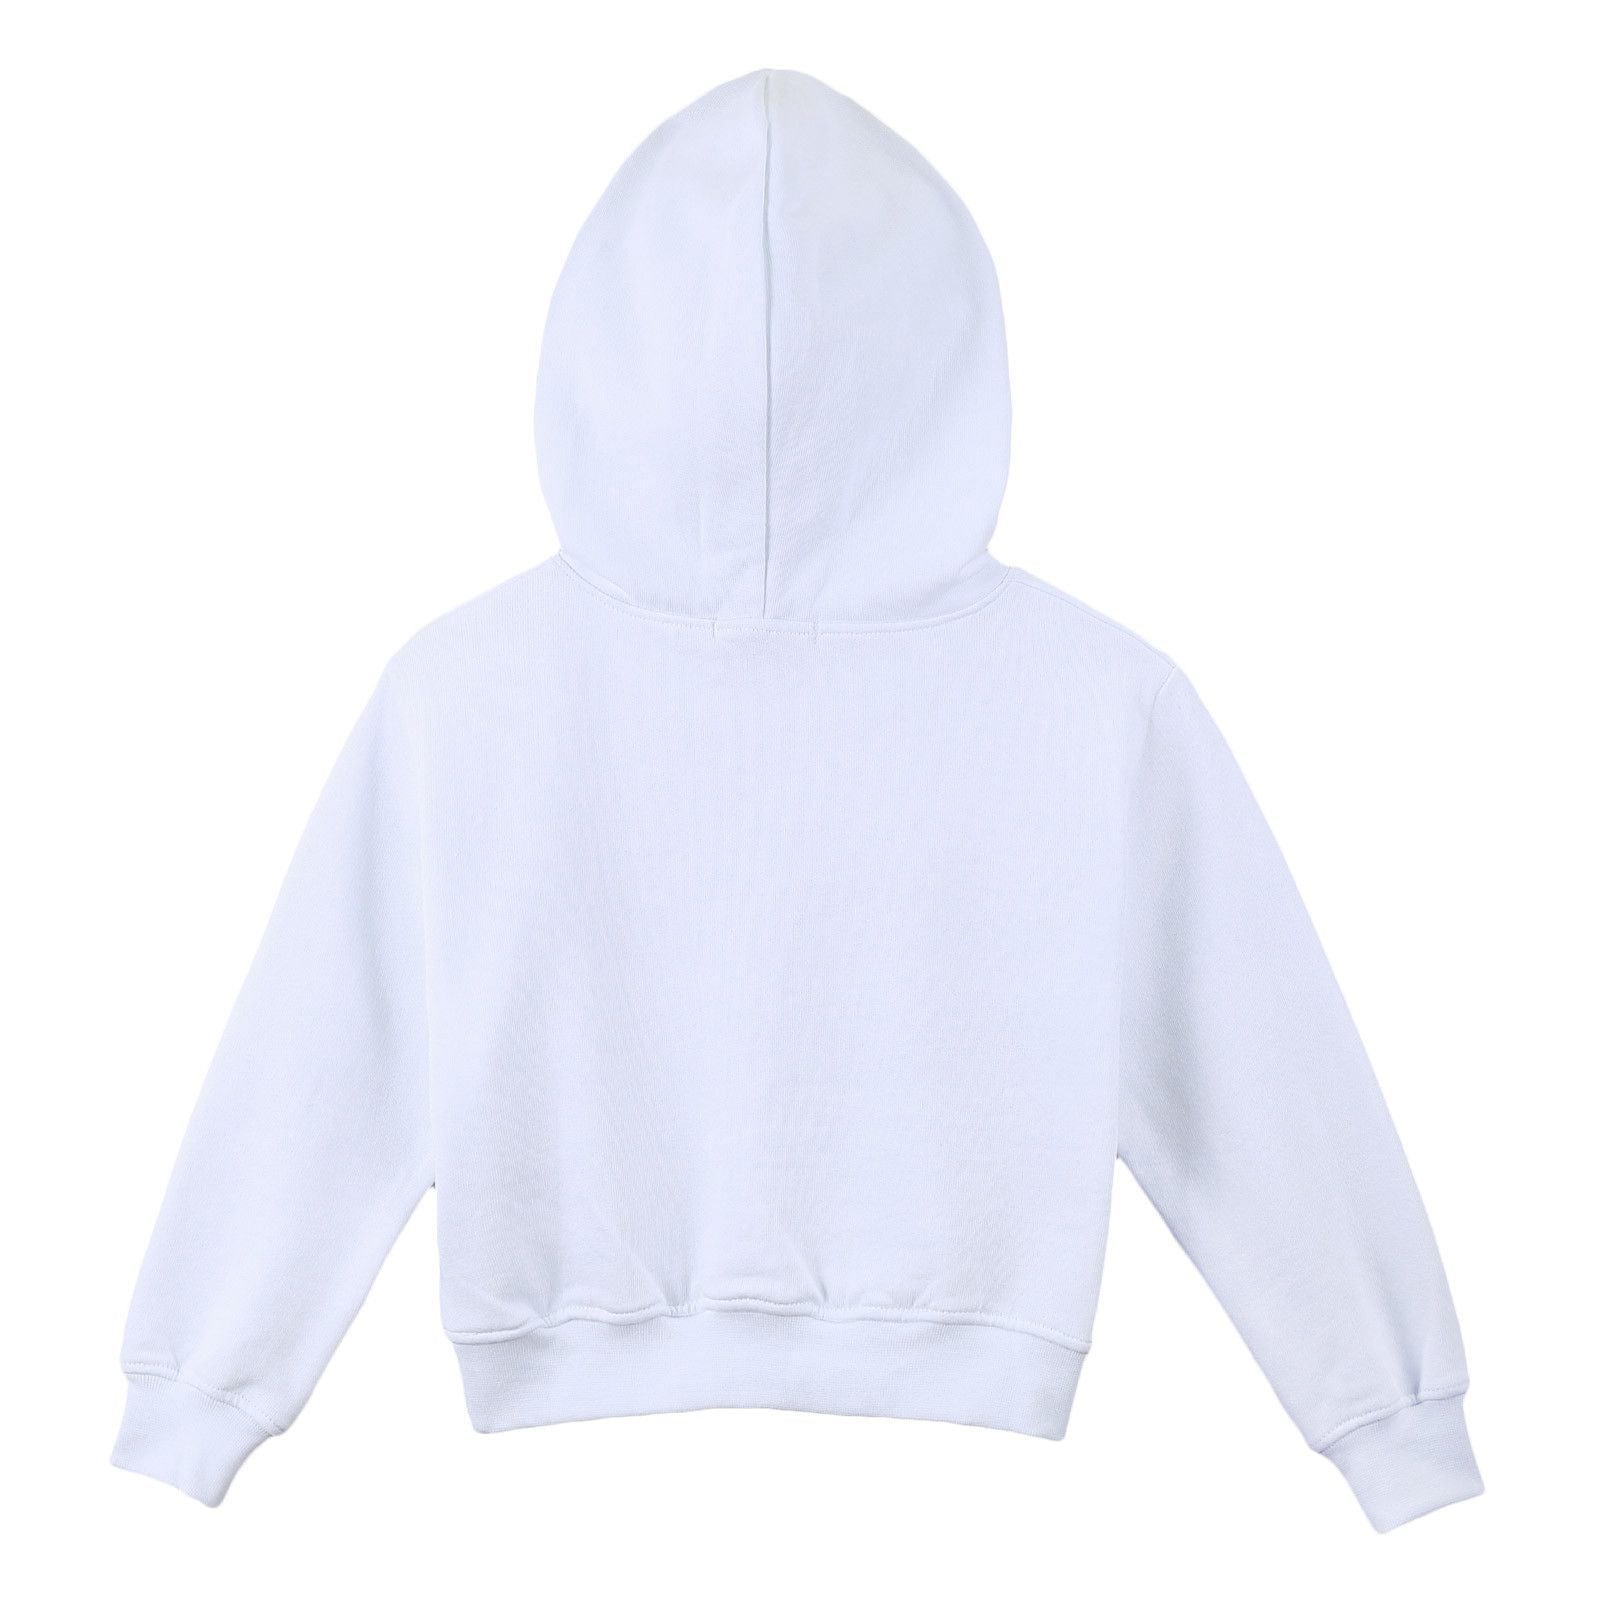 Girls White Cotton Hooded Sweater With Brand Name Logo - CÉMAROSE | Children's Fashion Store - 2